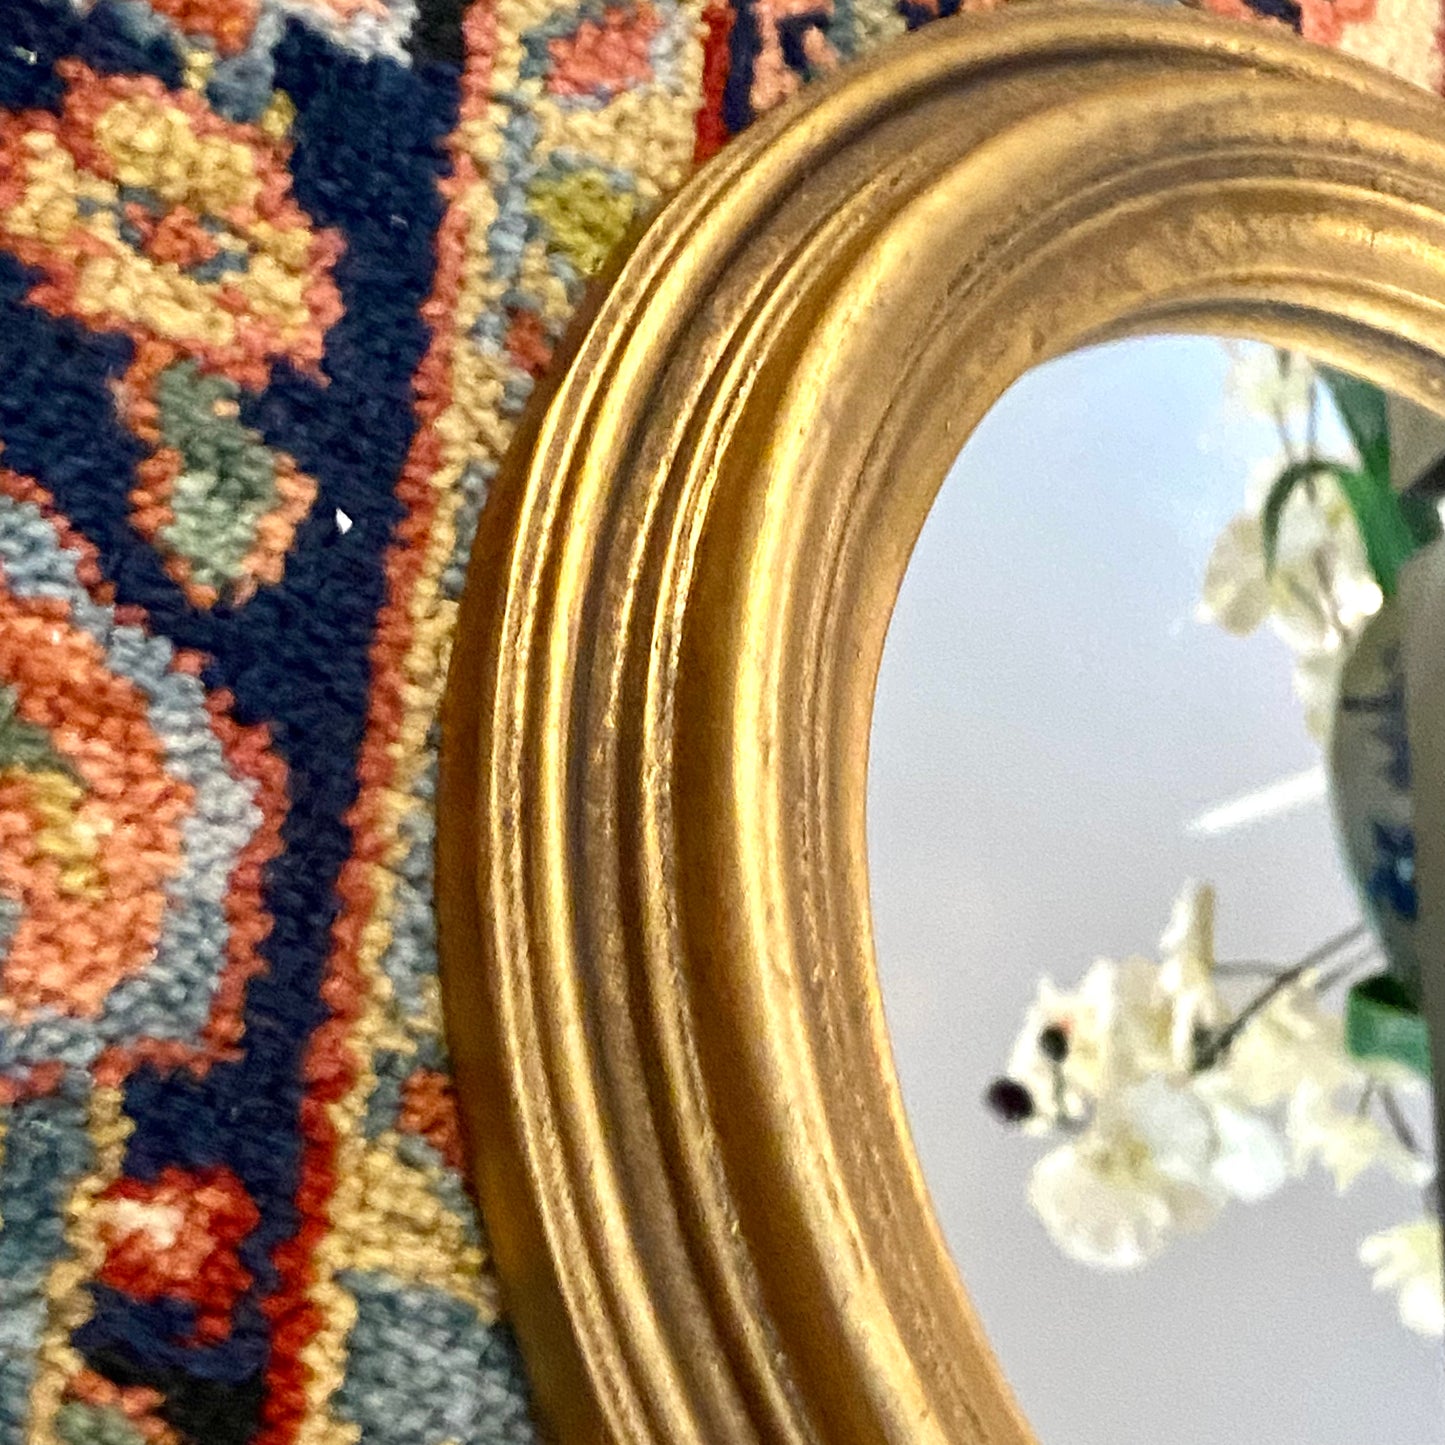 Vintage round gold gilt mirrors for wall or display